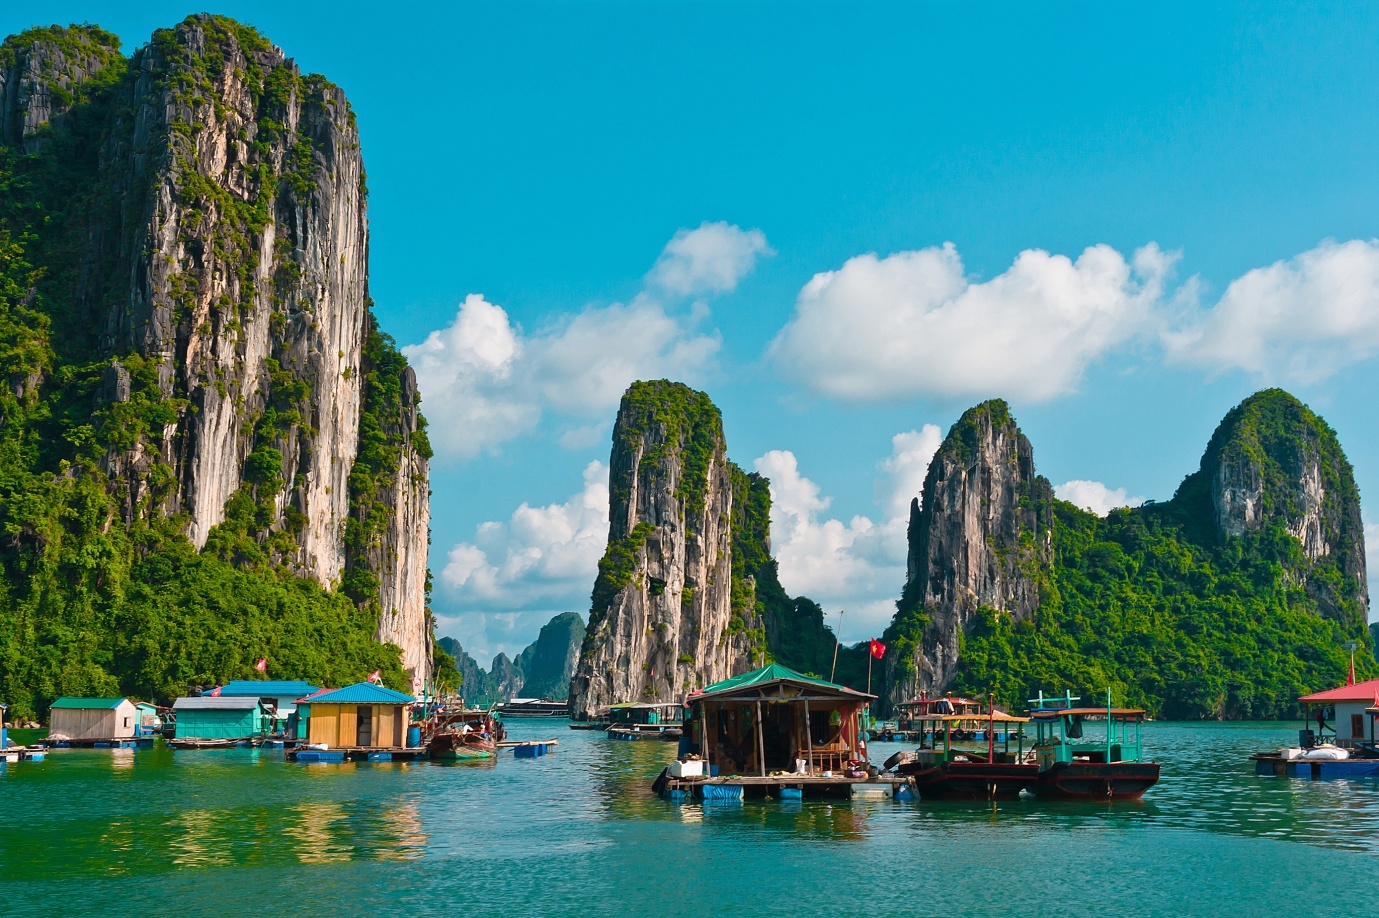 Coming to Halong Bay in winter has got much more attractive than ever